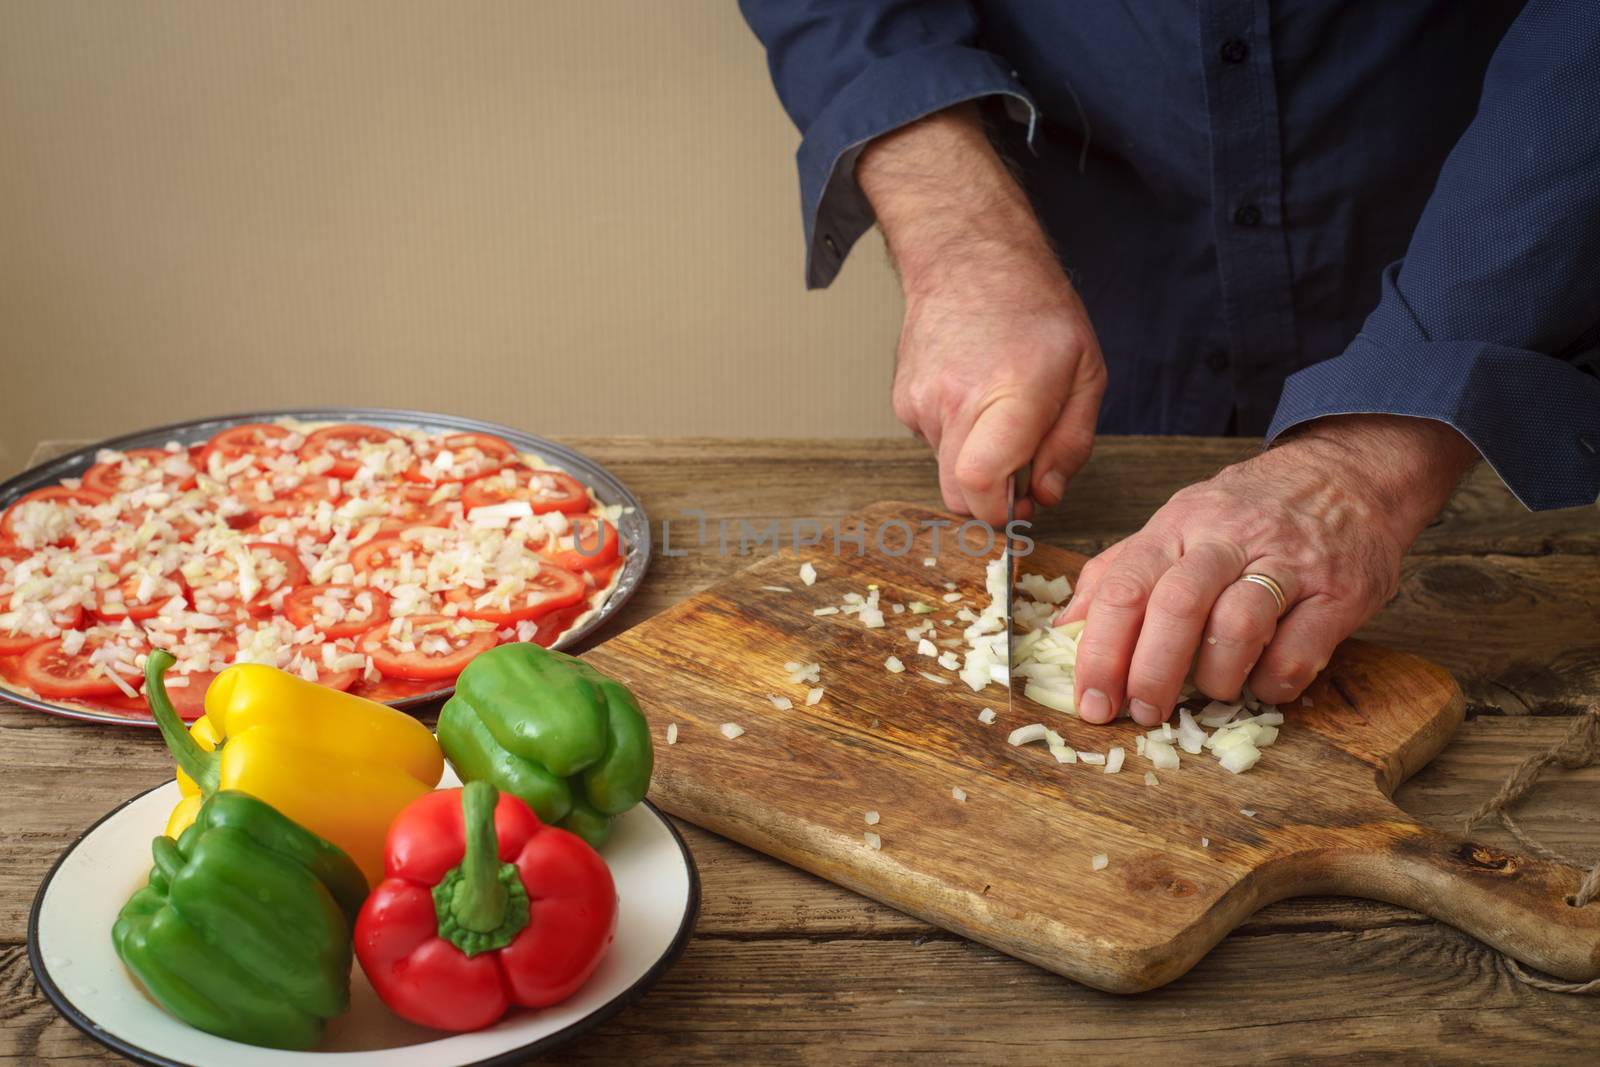 Man knife sliced onion pizza on a wooden board horizontal